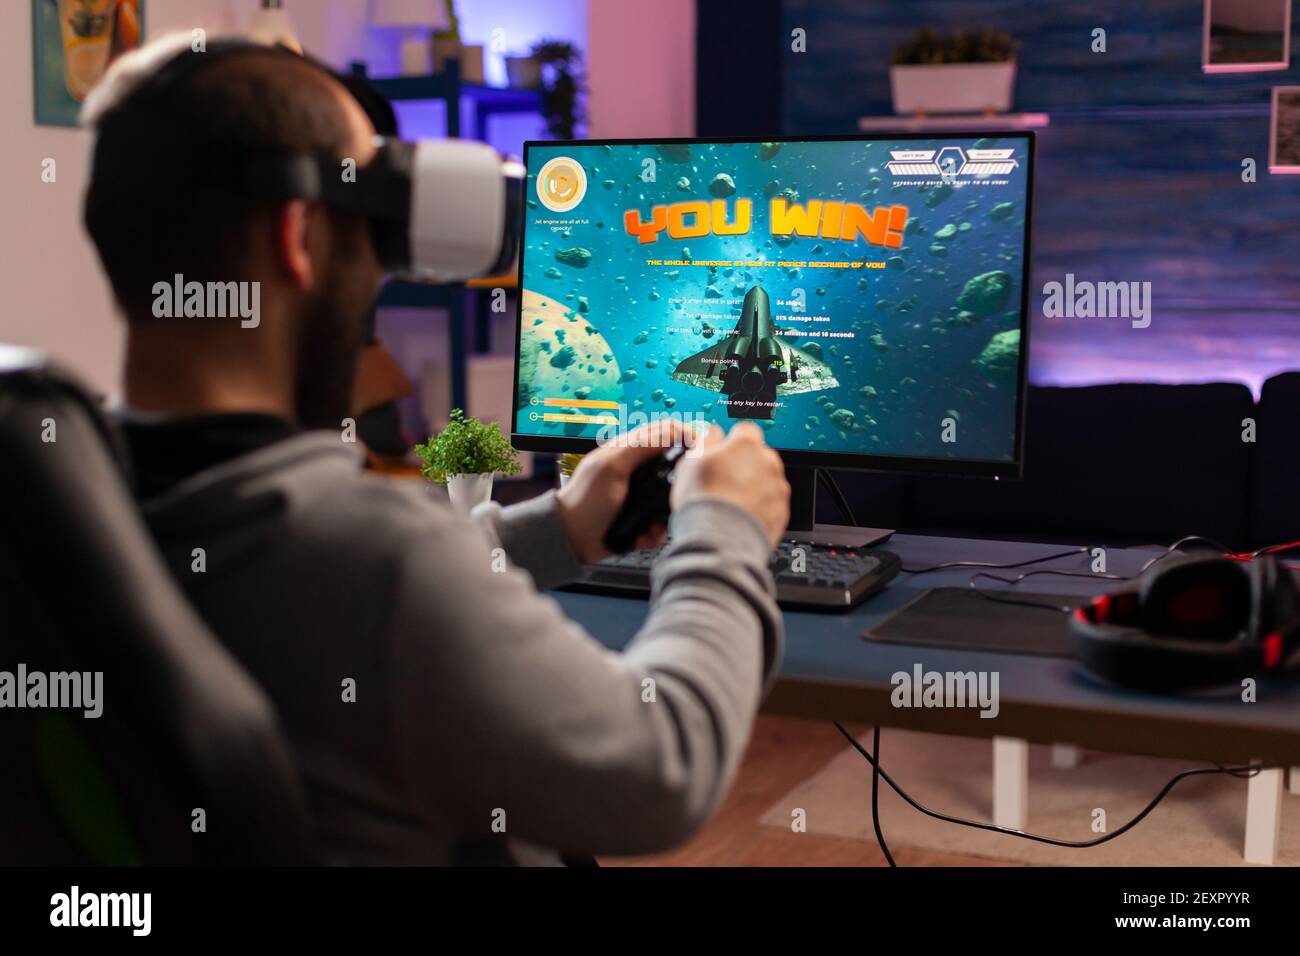 Gamer man winning space shooter game use virtual reality goggles